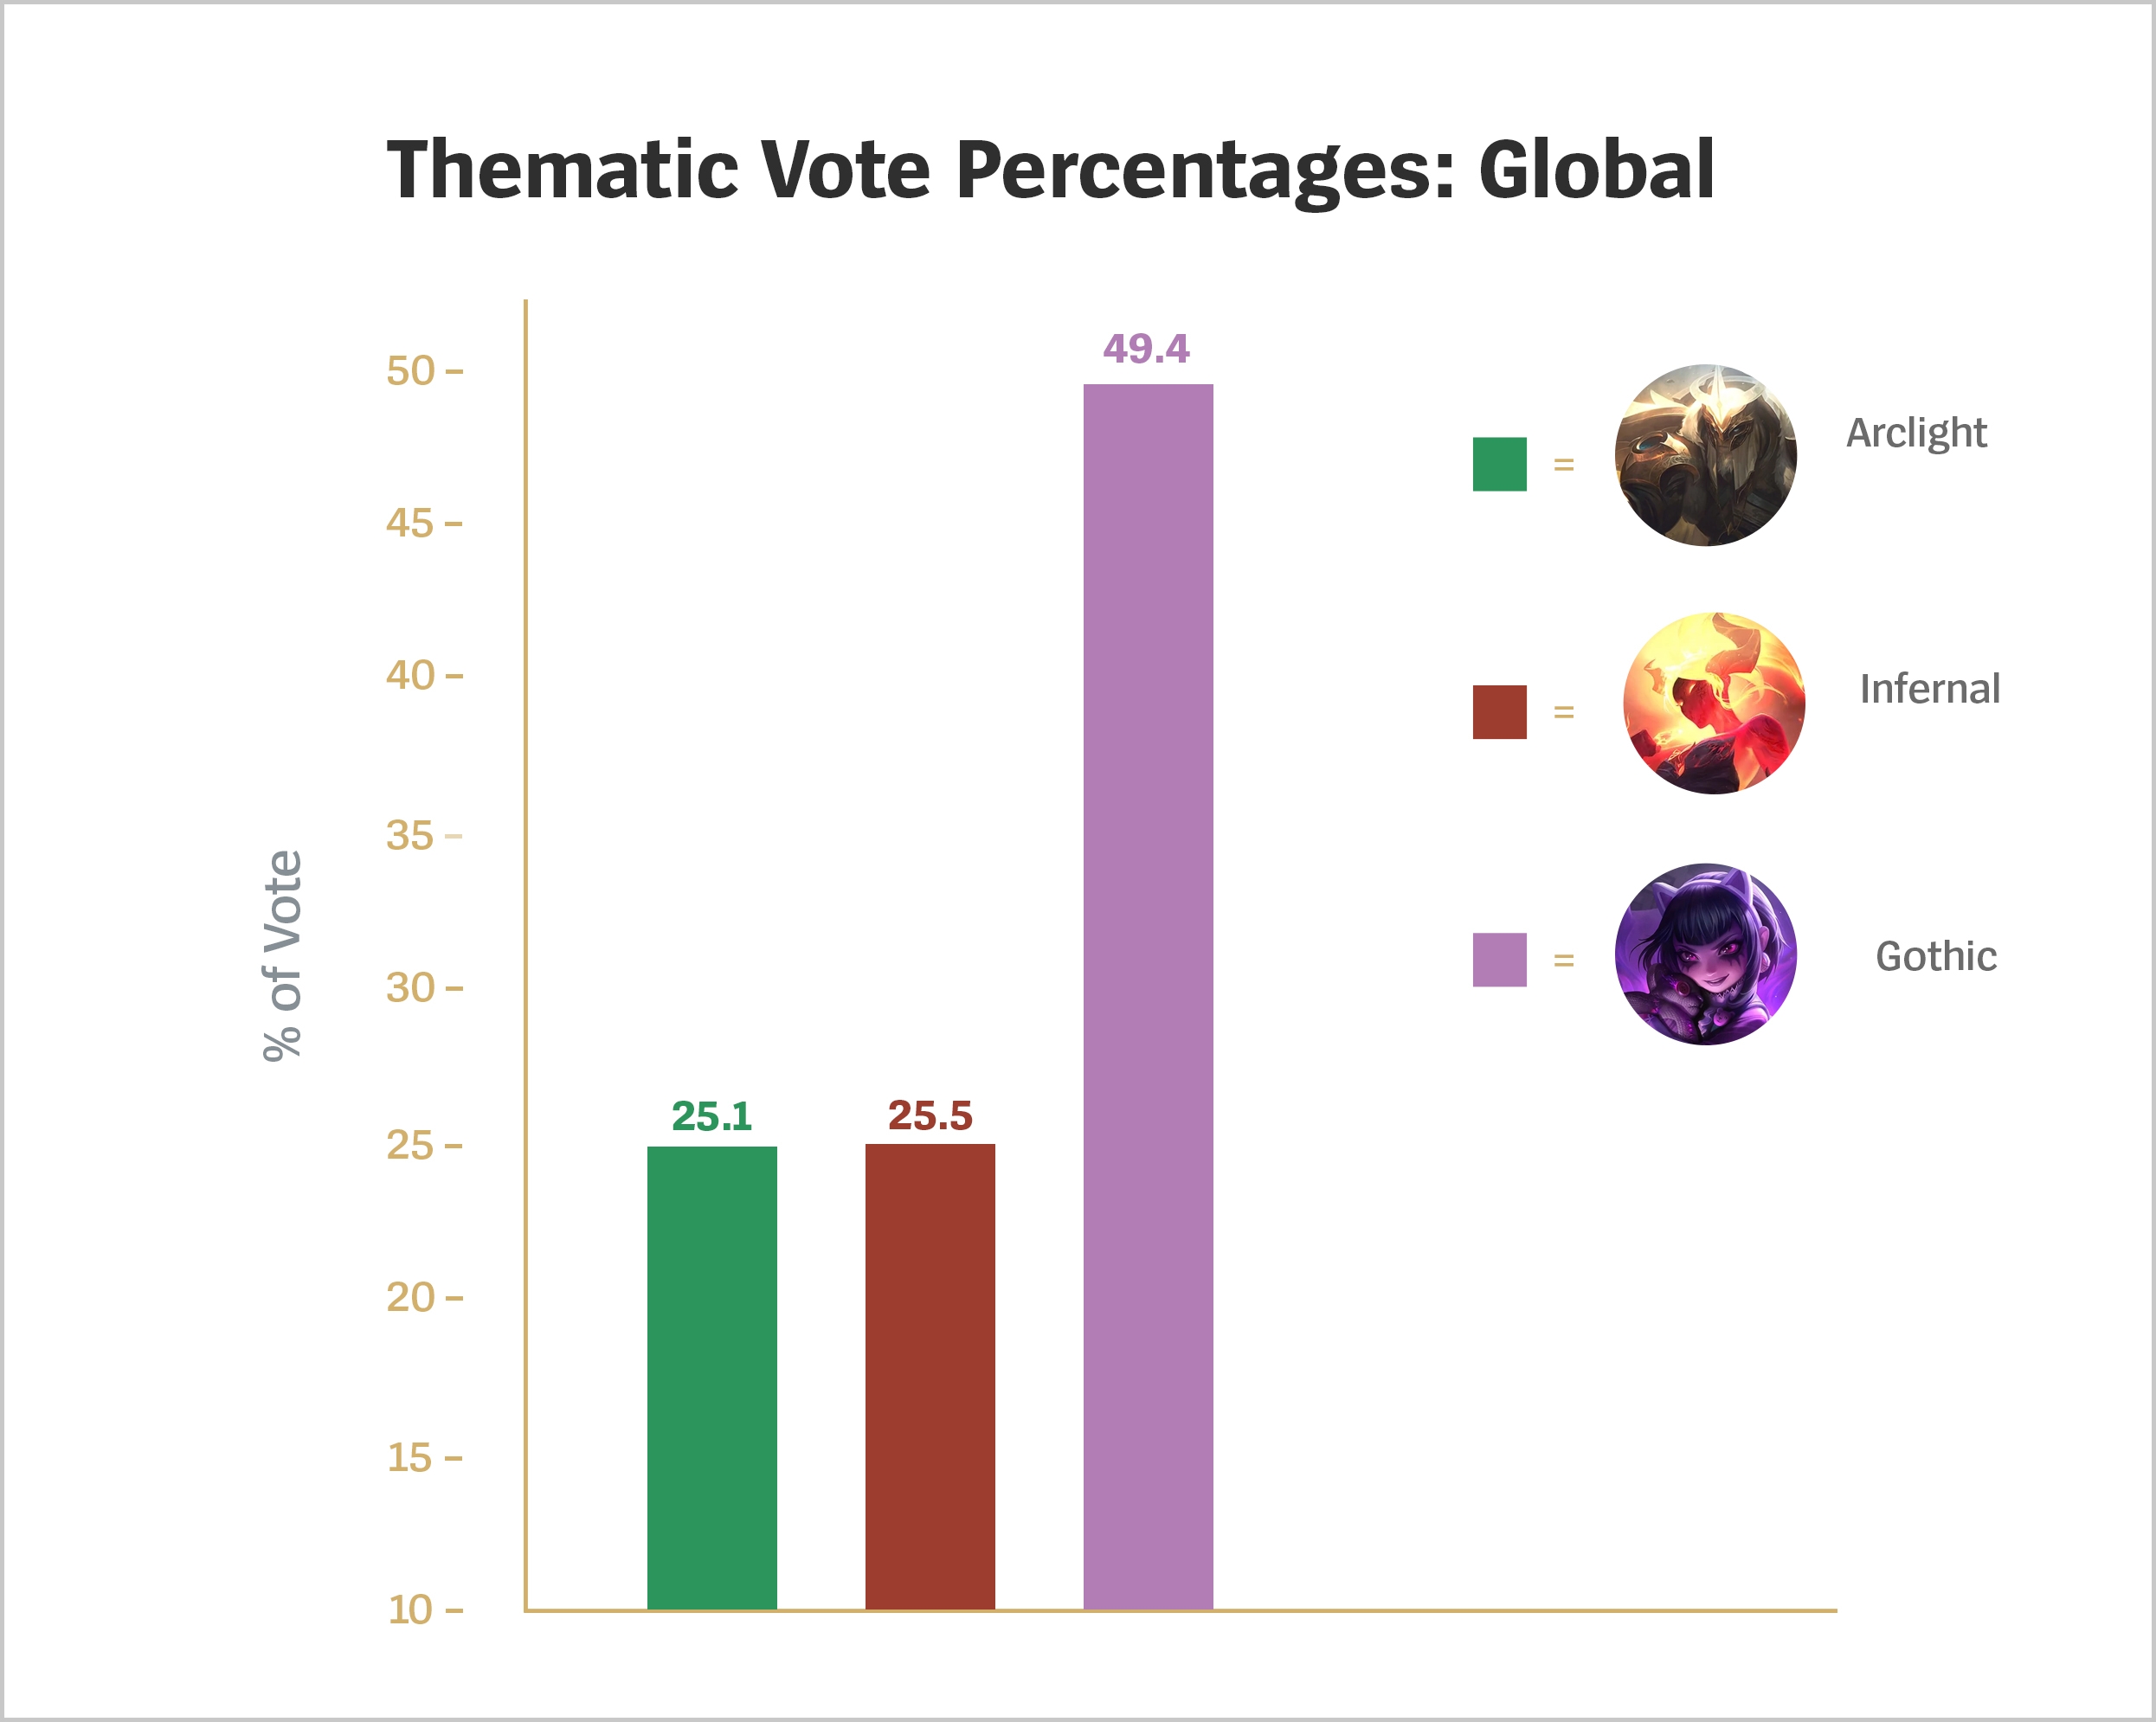 04_Thematic_Vote_Percentages_Global.jpg